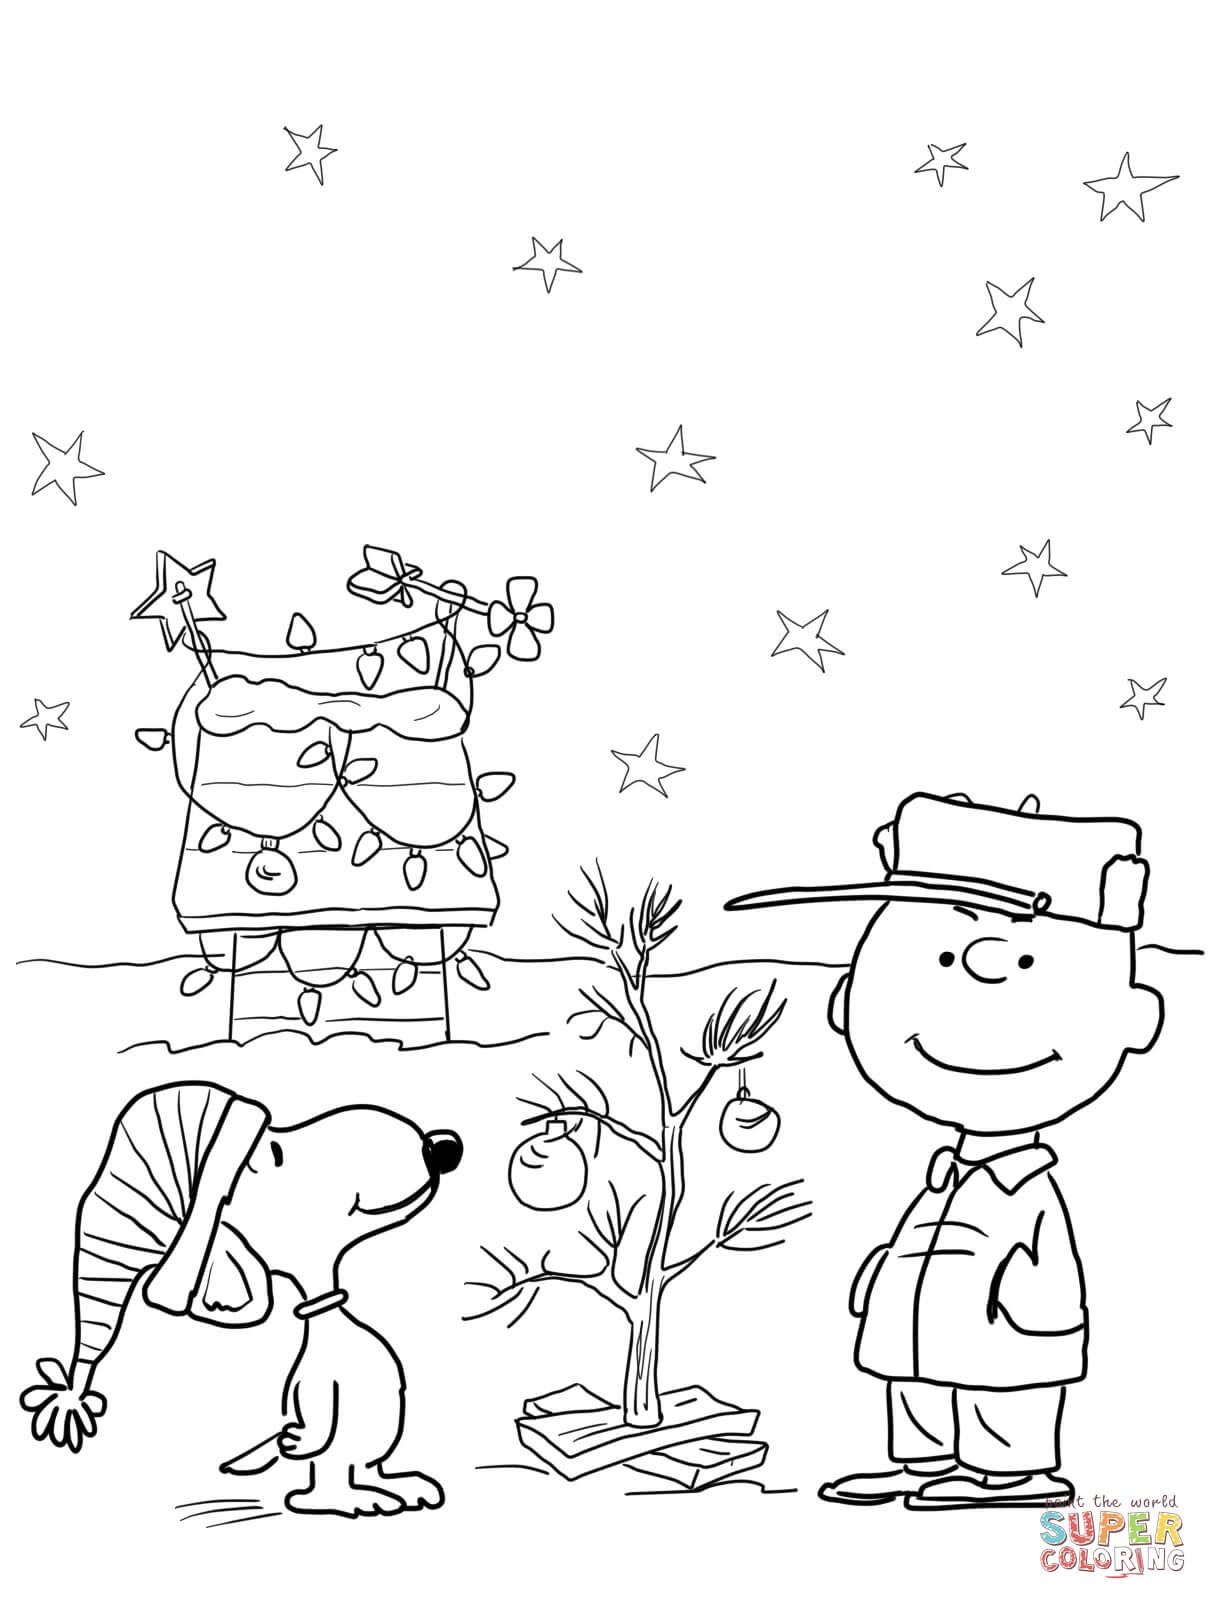 Charlie Brown Christmas Coloring Page | Free Printable Coloring Pages - Free Printable Christmas Cartoon Coloring Pages